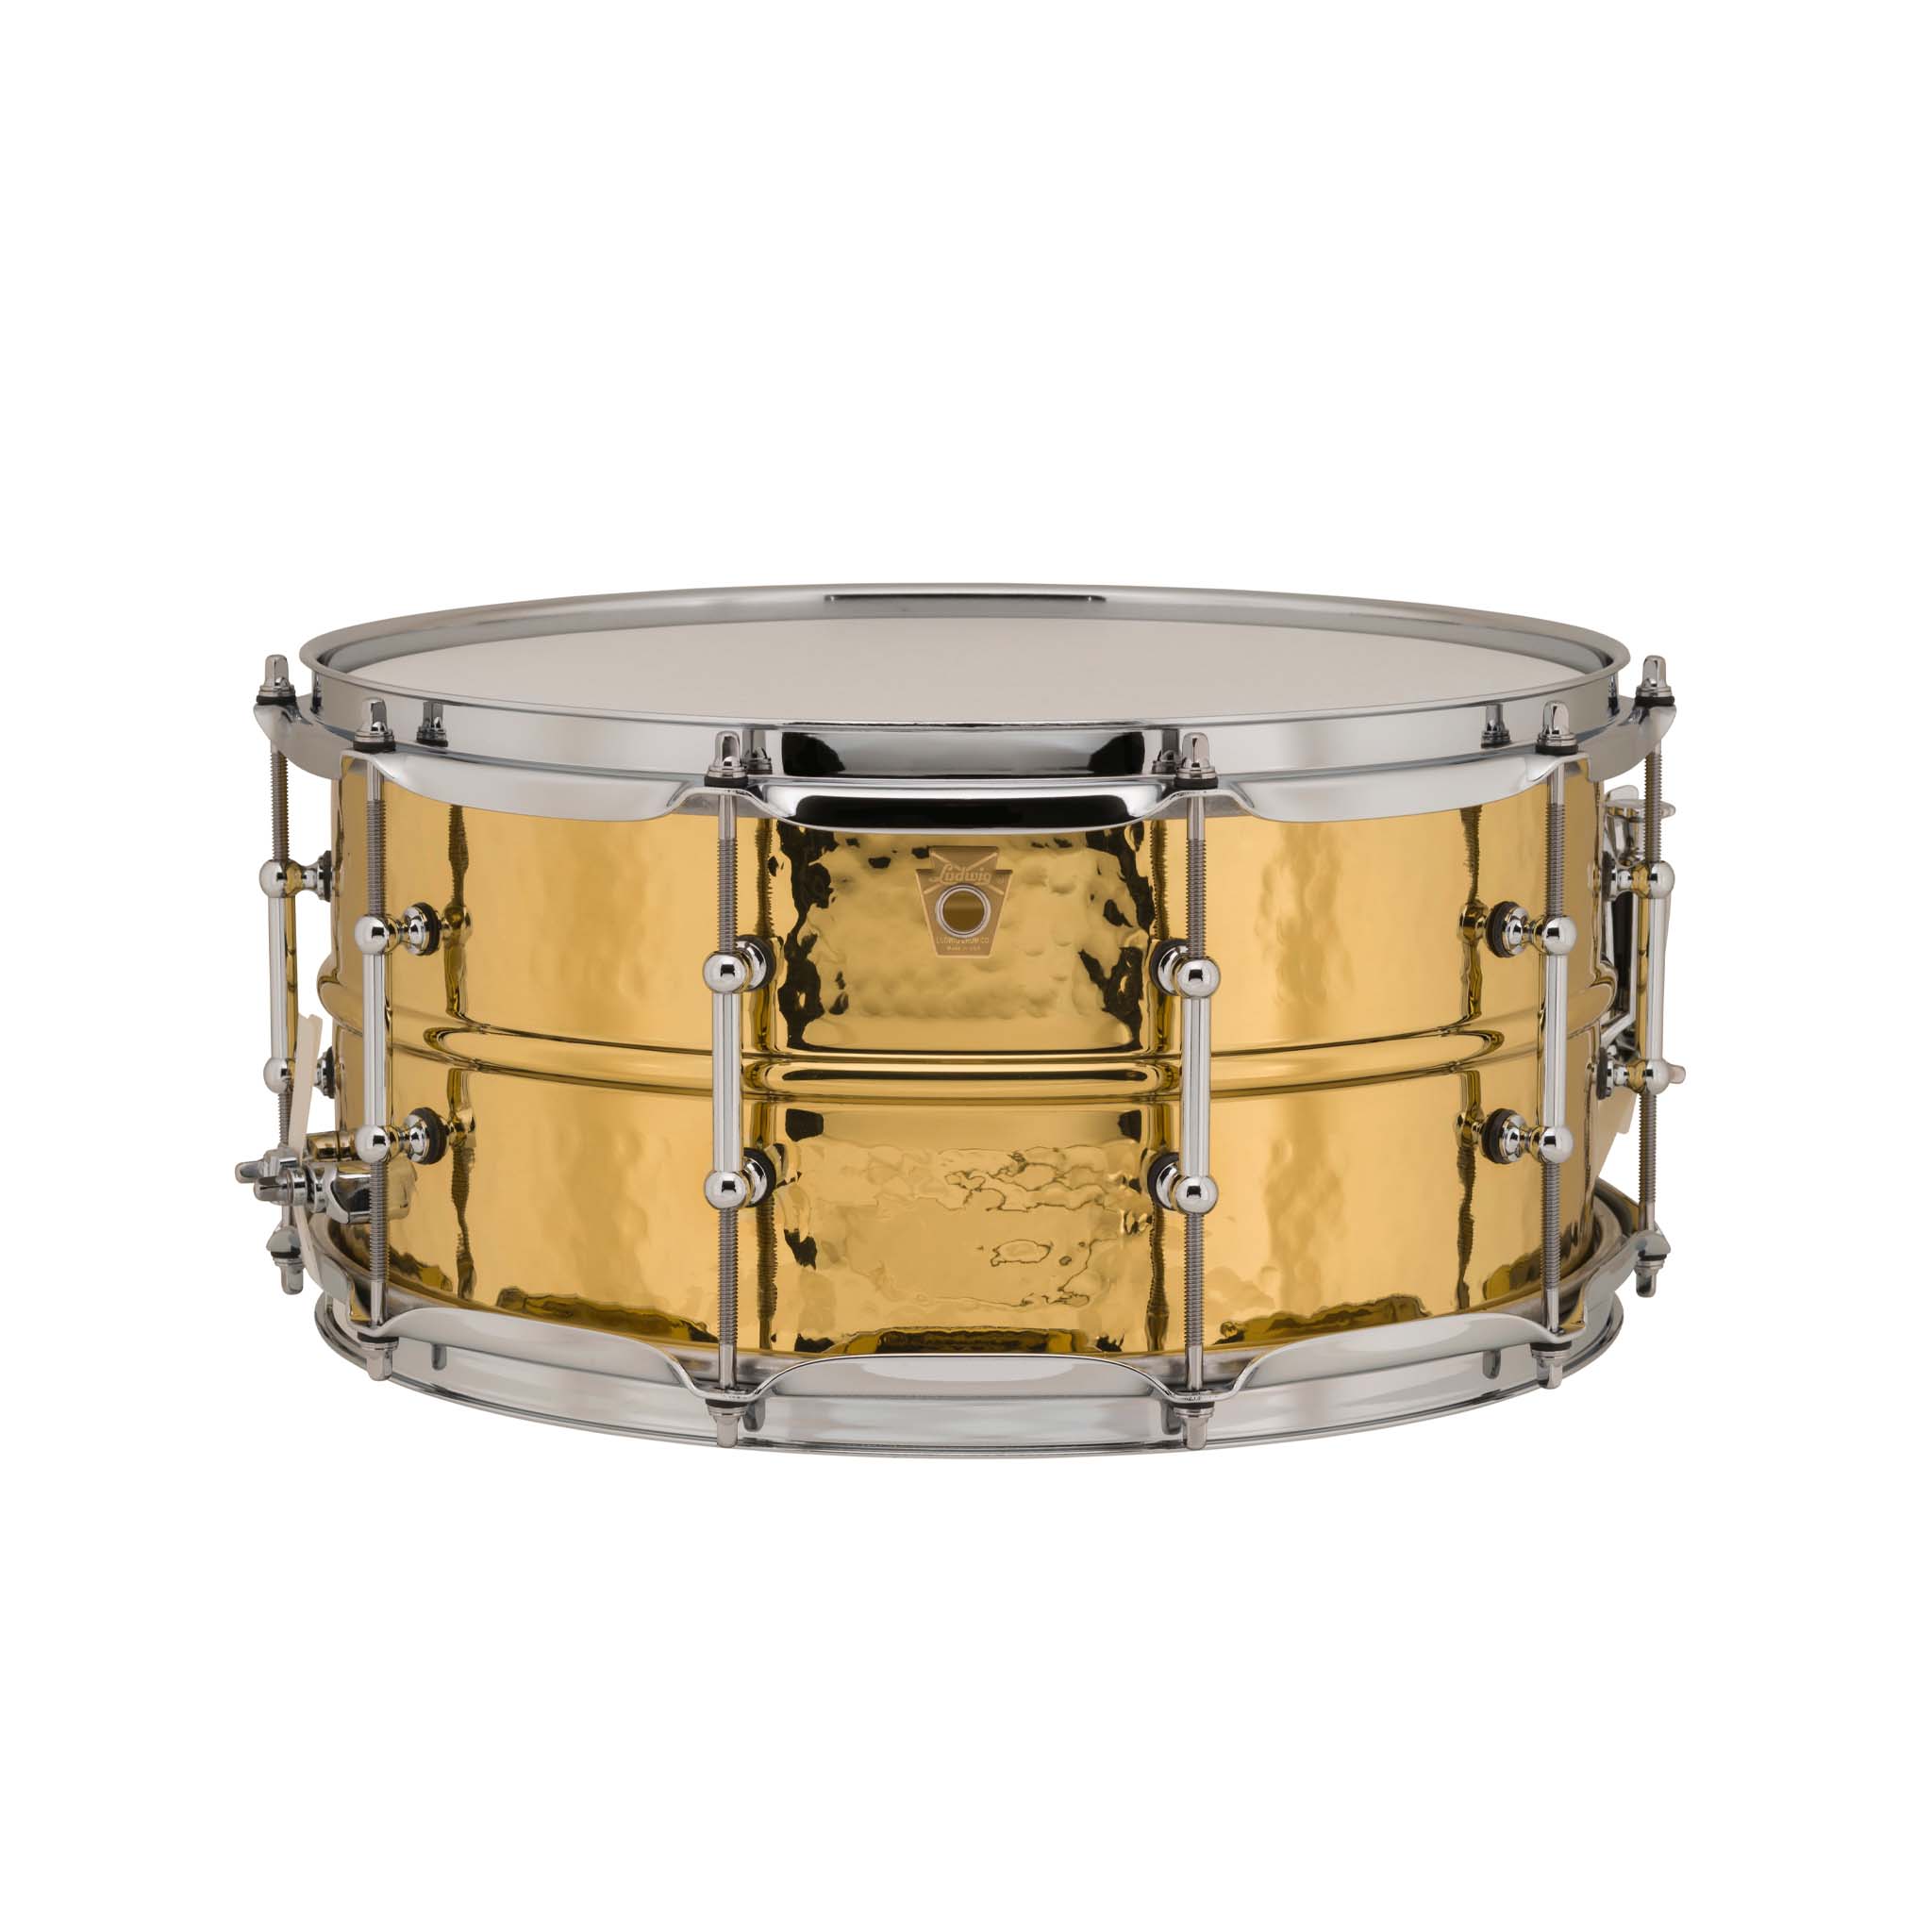 Ludwig LB422BKT 6.5x14inch Hammered Brass Snare Drum